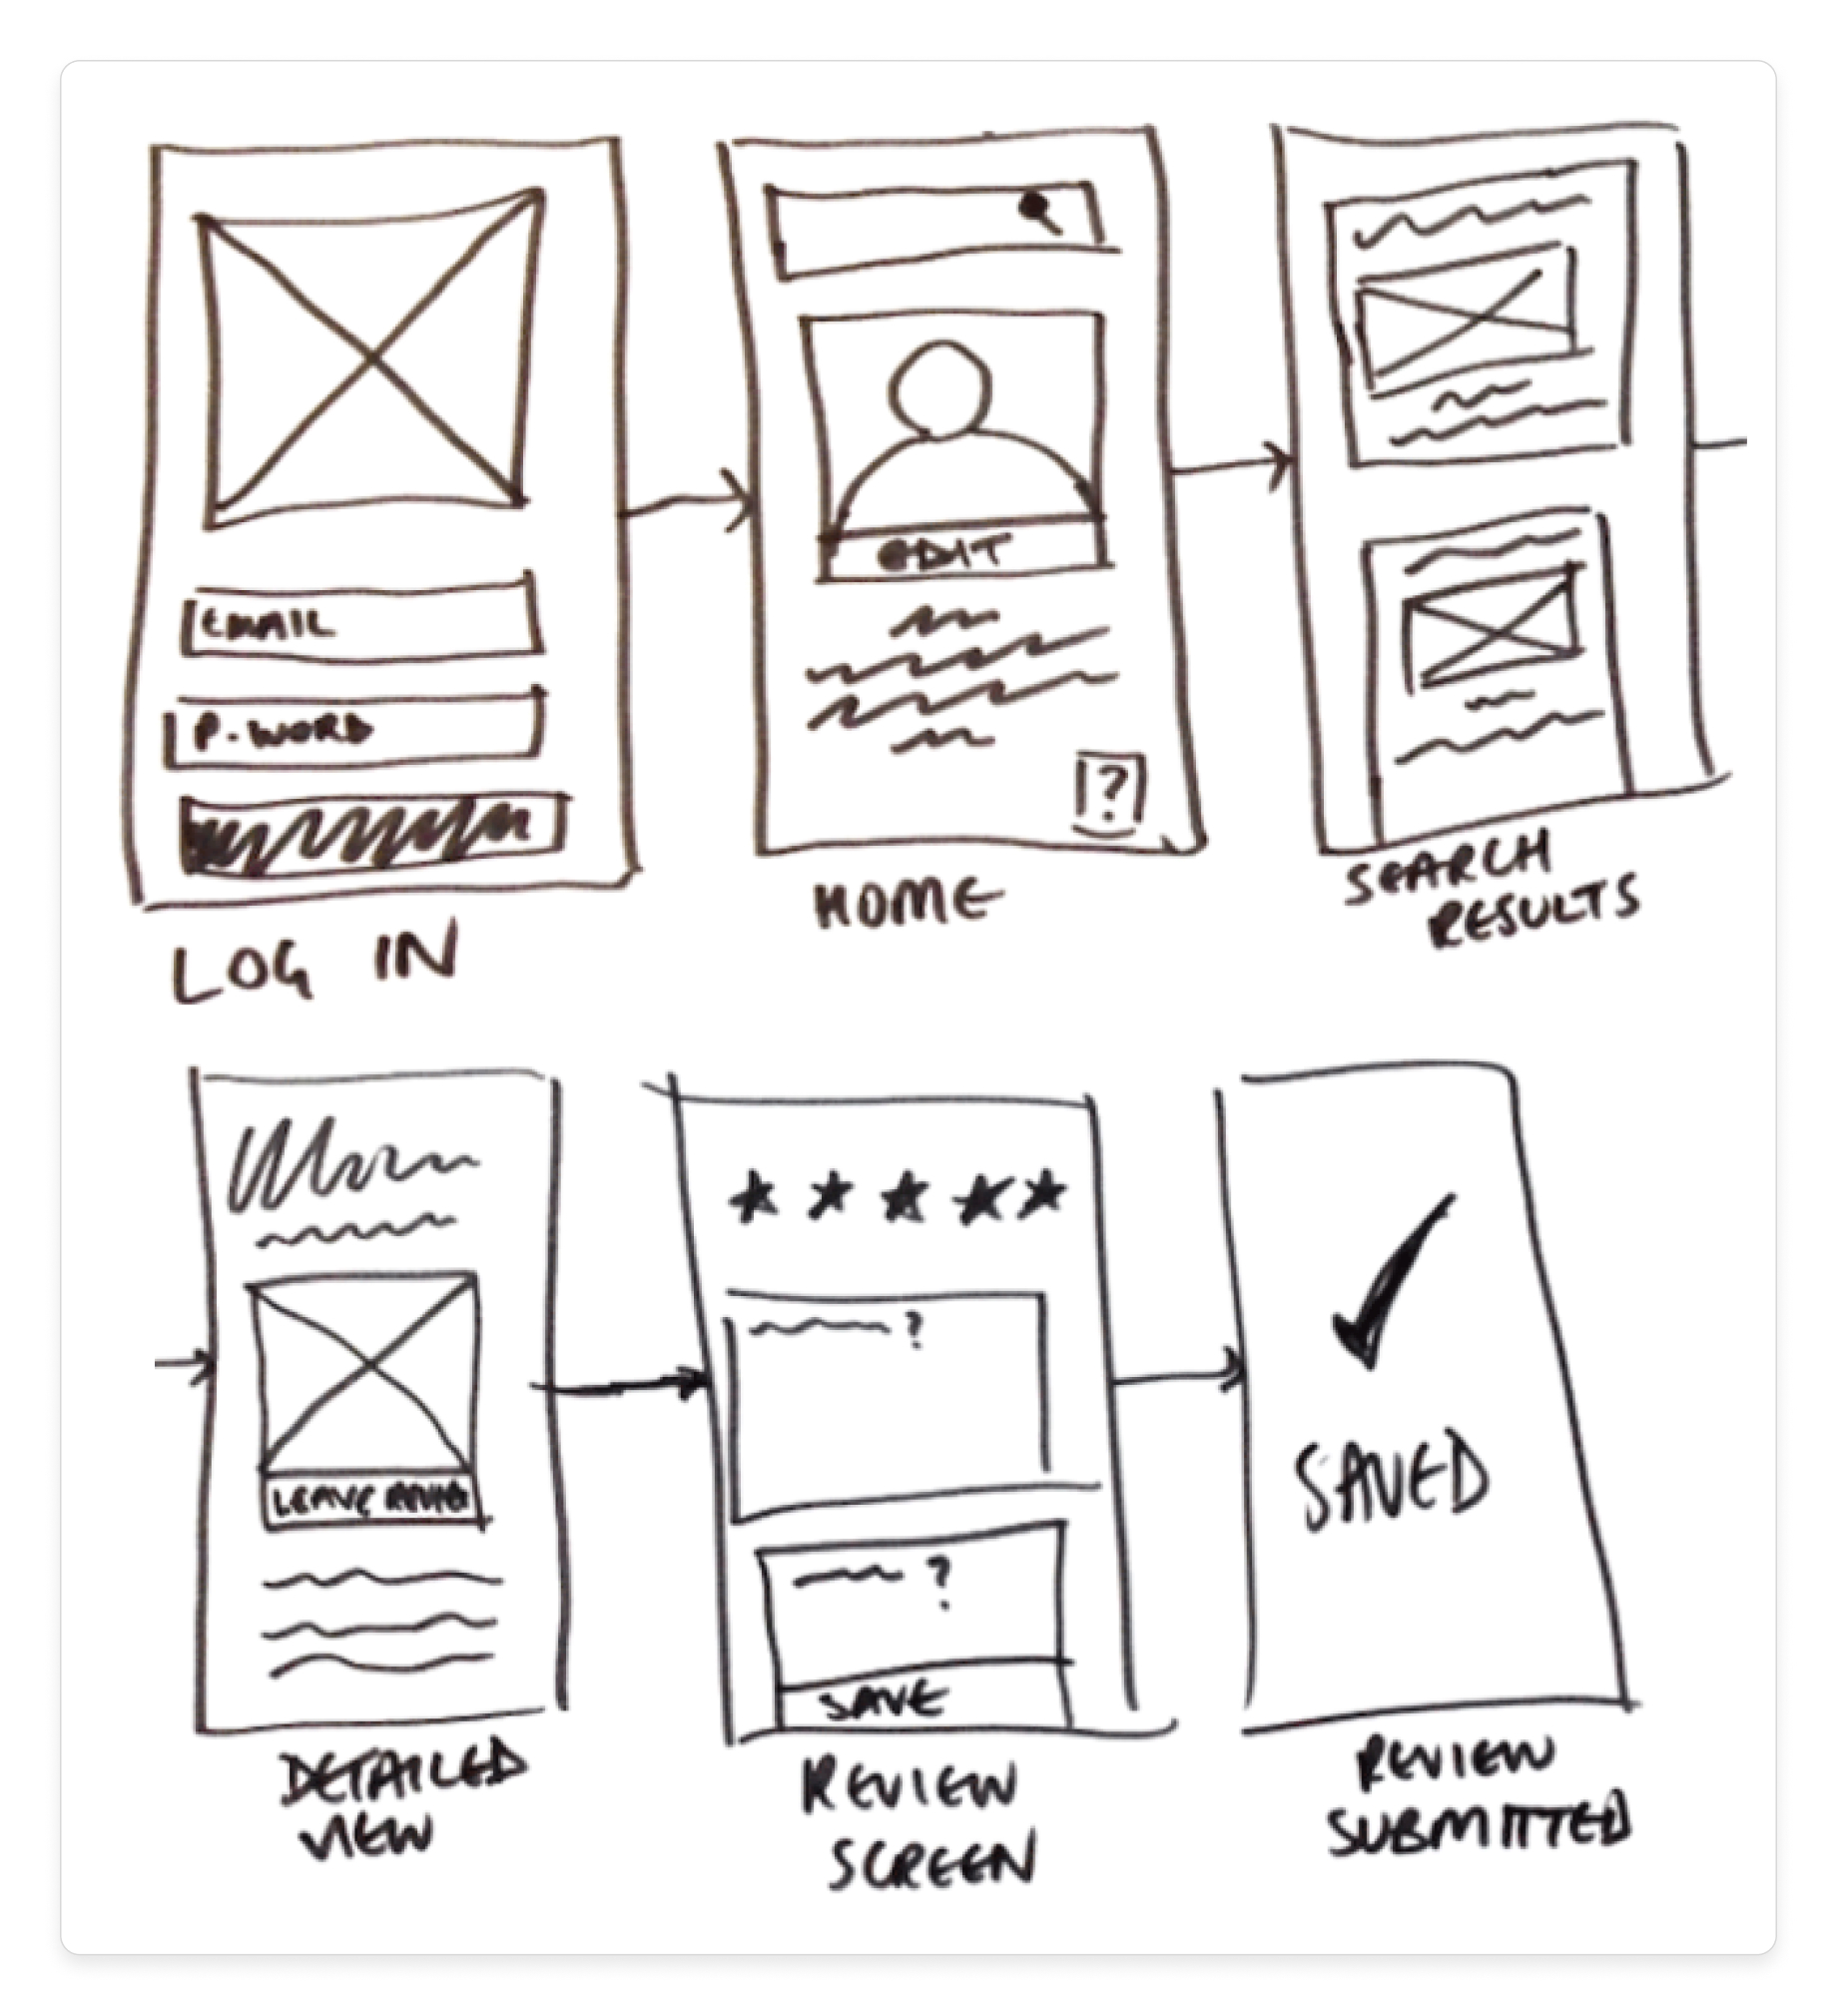 A series of hand-drawn wireframes